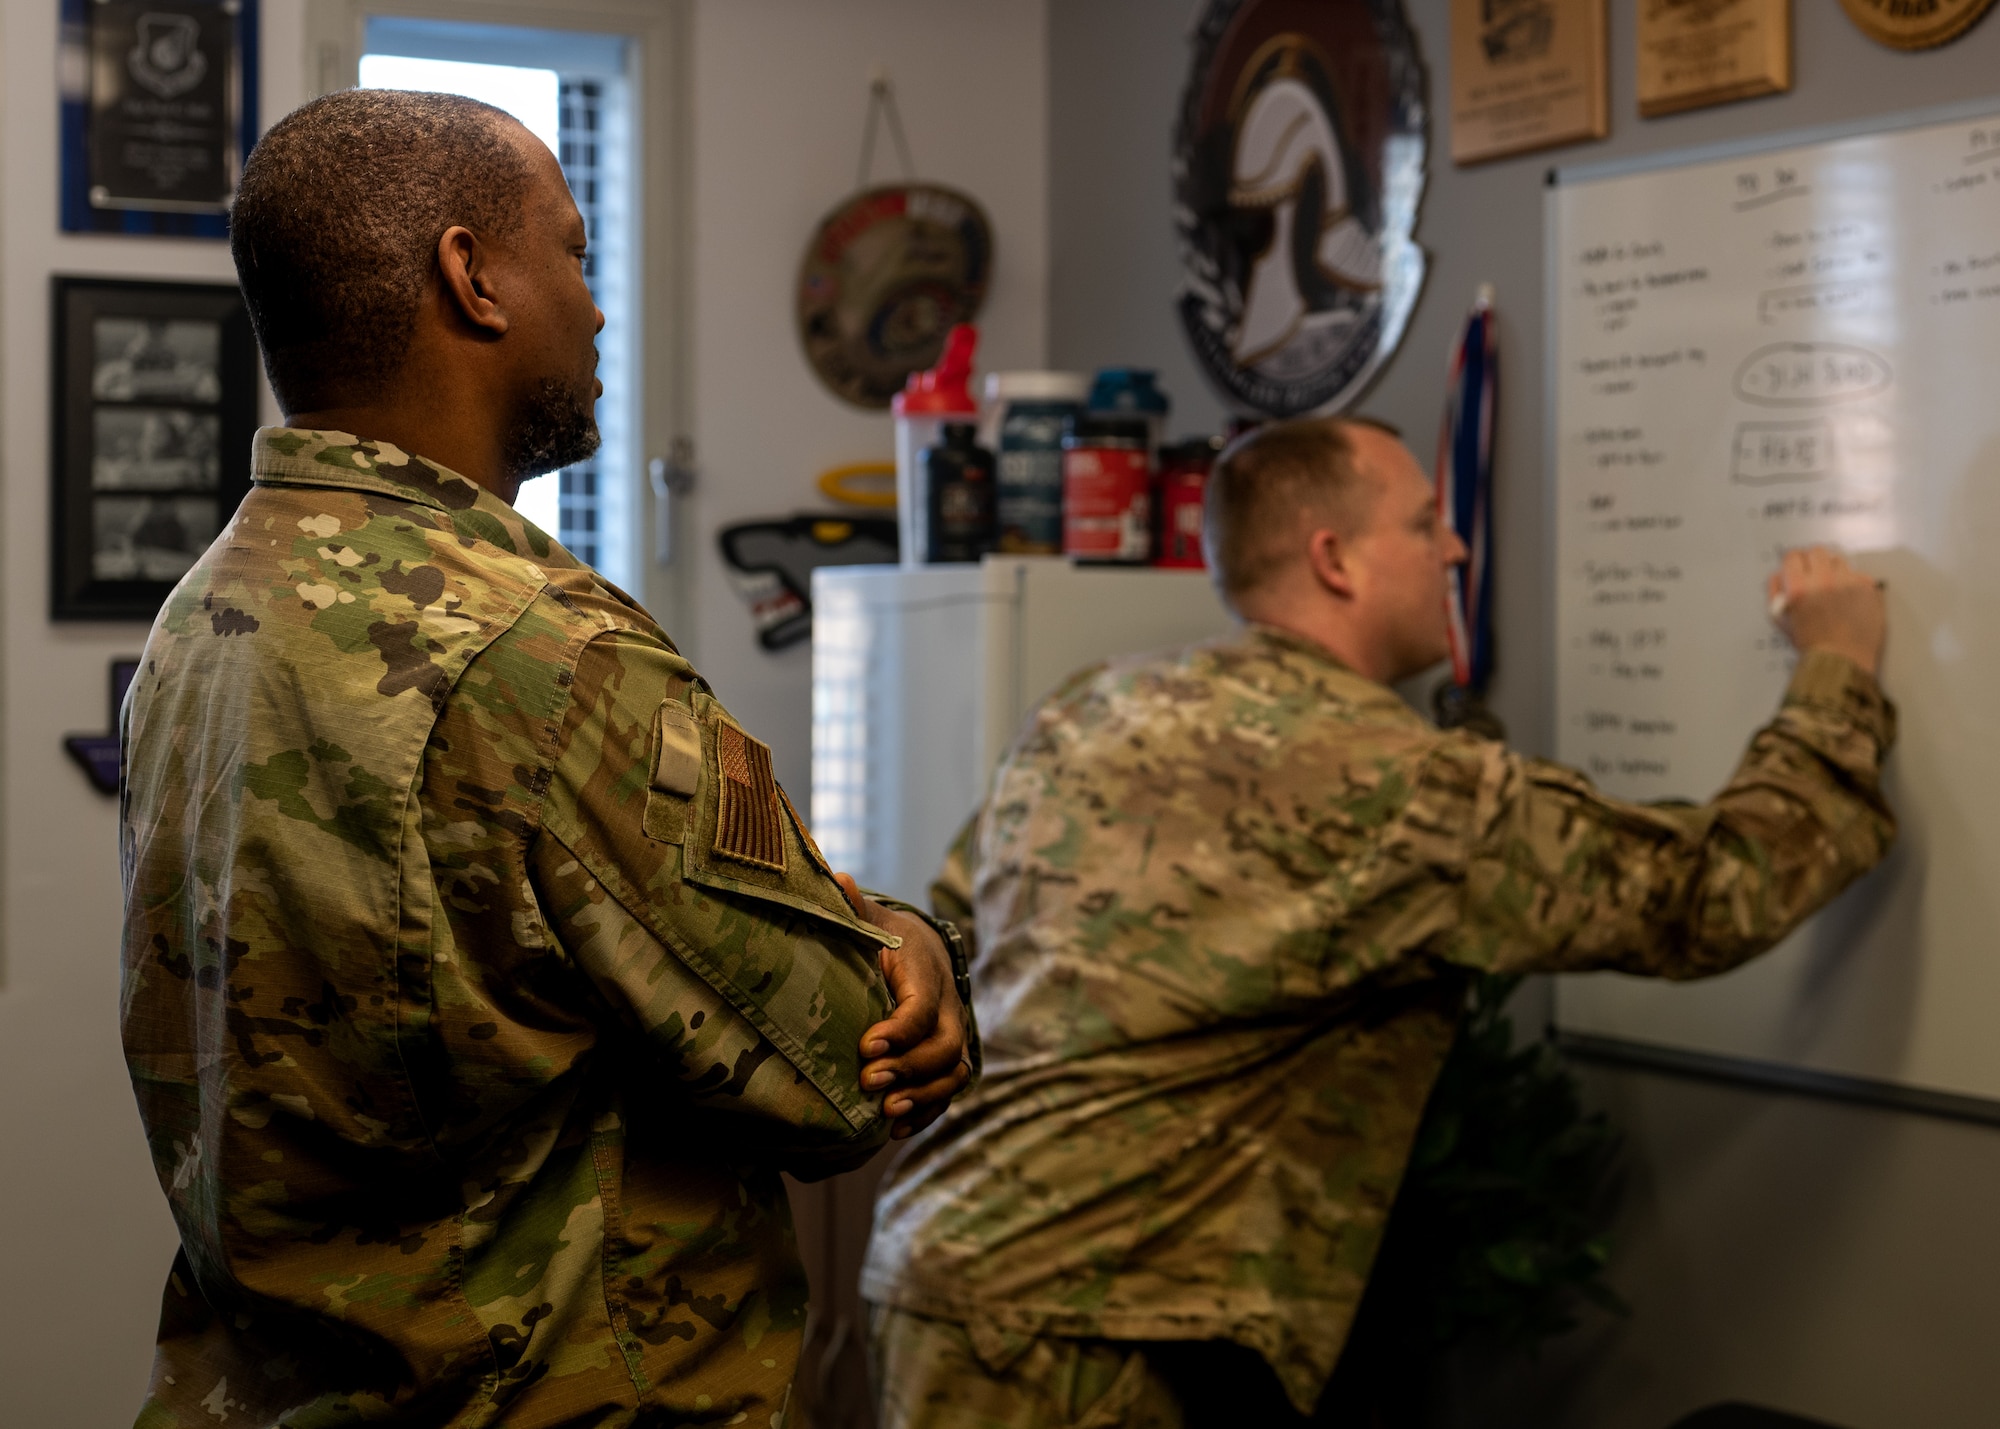 U.S. Air Force Tech. Sgt. Dundre Davis, Liberty Wing Chapel noncommissioned officer in charge of programs and administration, watches Master Sgt. Noah Wells, Religious Affairs superintendent, make notes on his whiteboard at Royal Air Force Lakenheath, England, April 3, 2023.